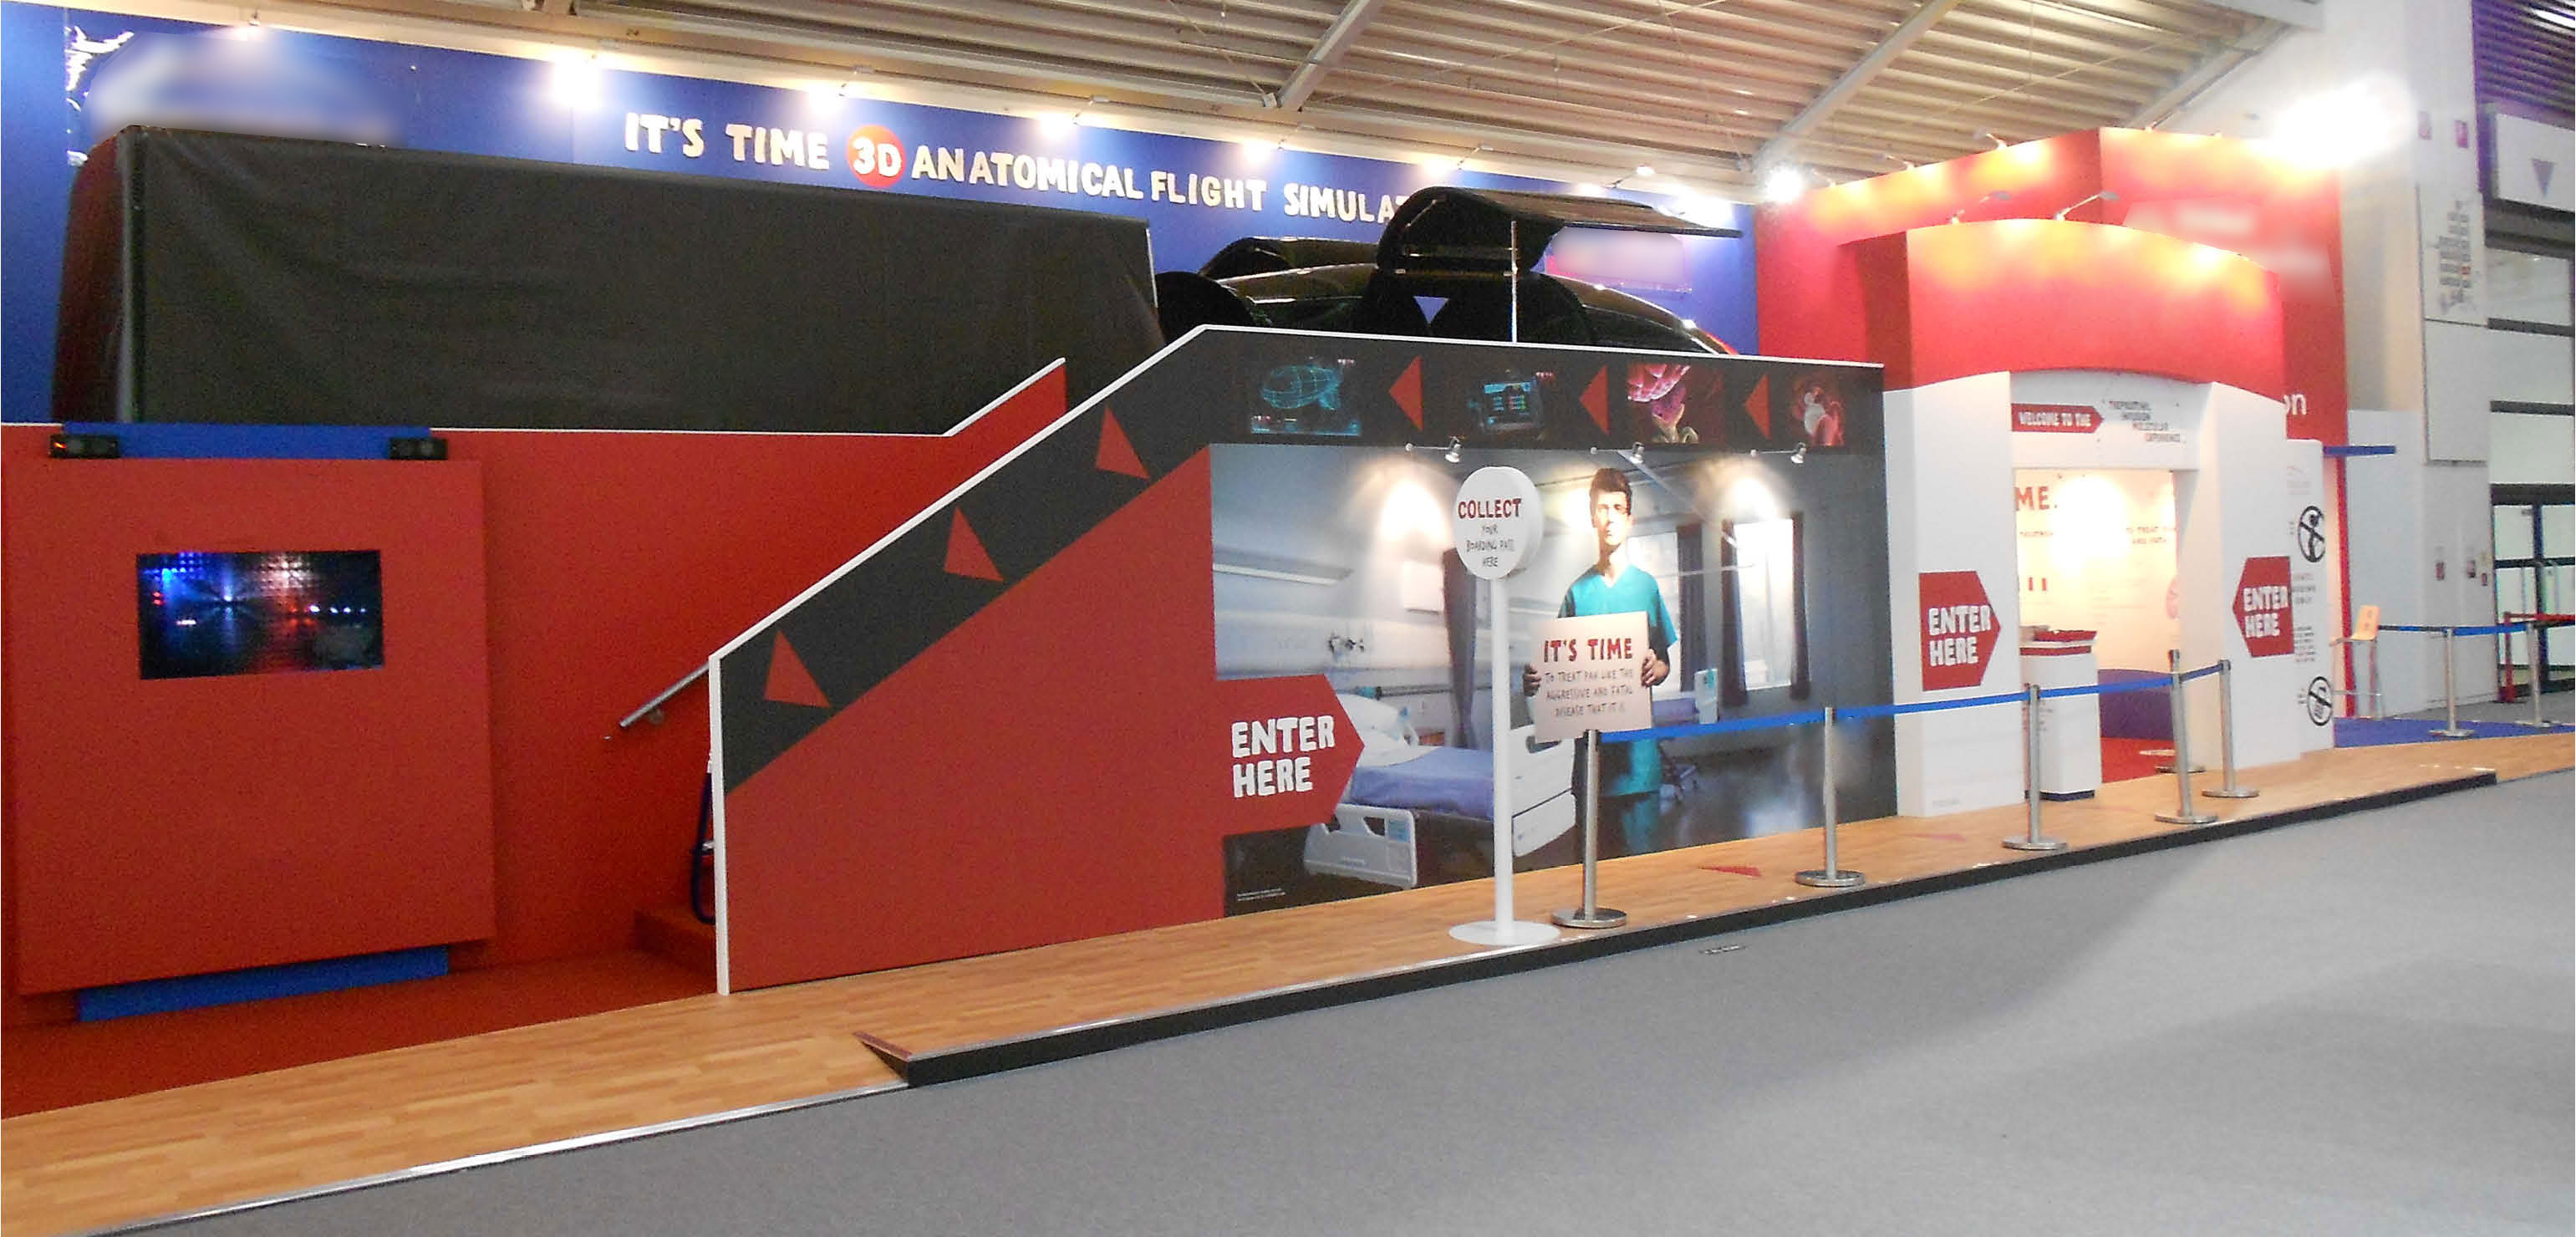 ‘It’s Time’ Motion Simulator Exhibition Booth